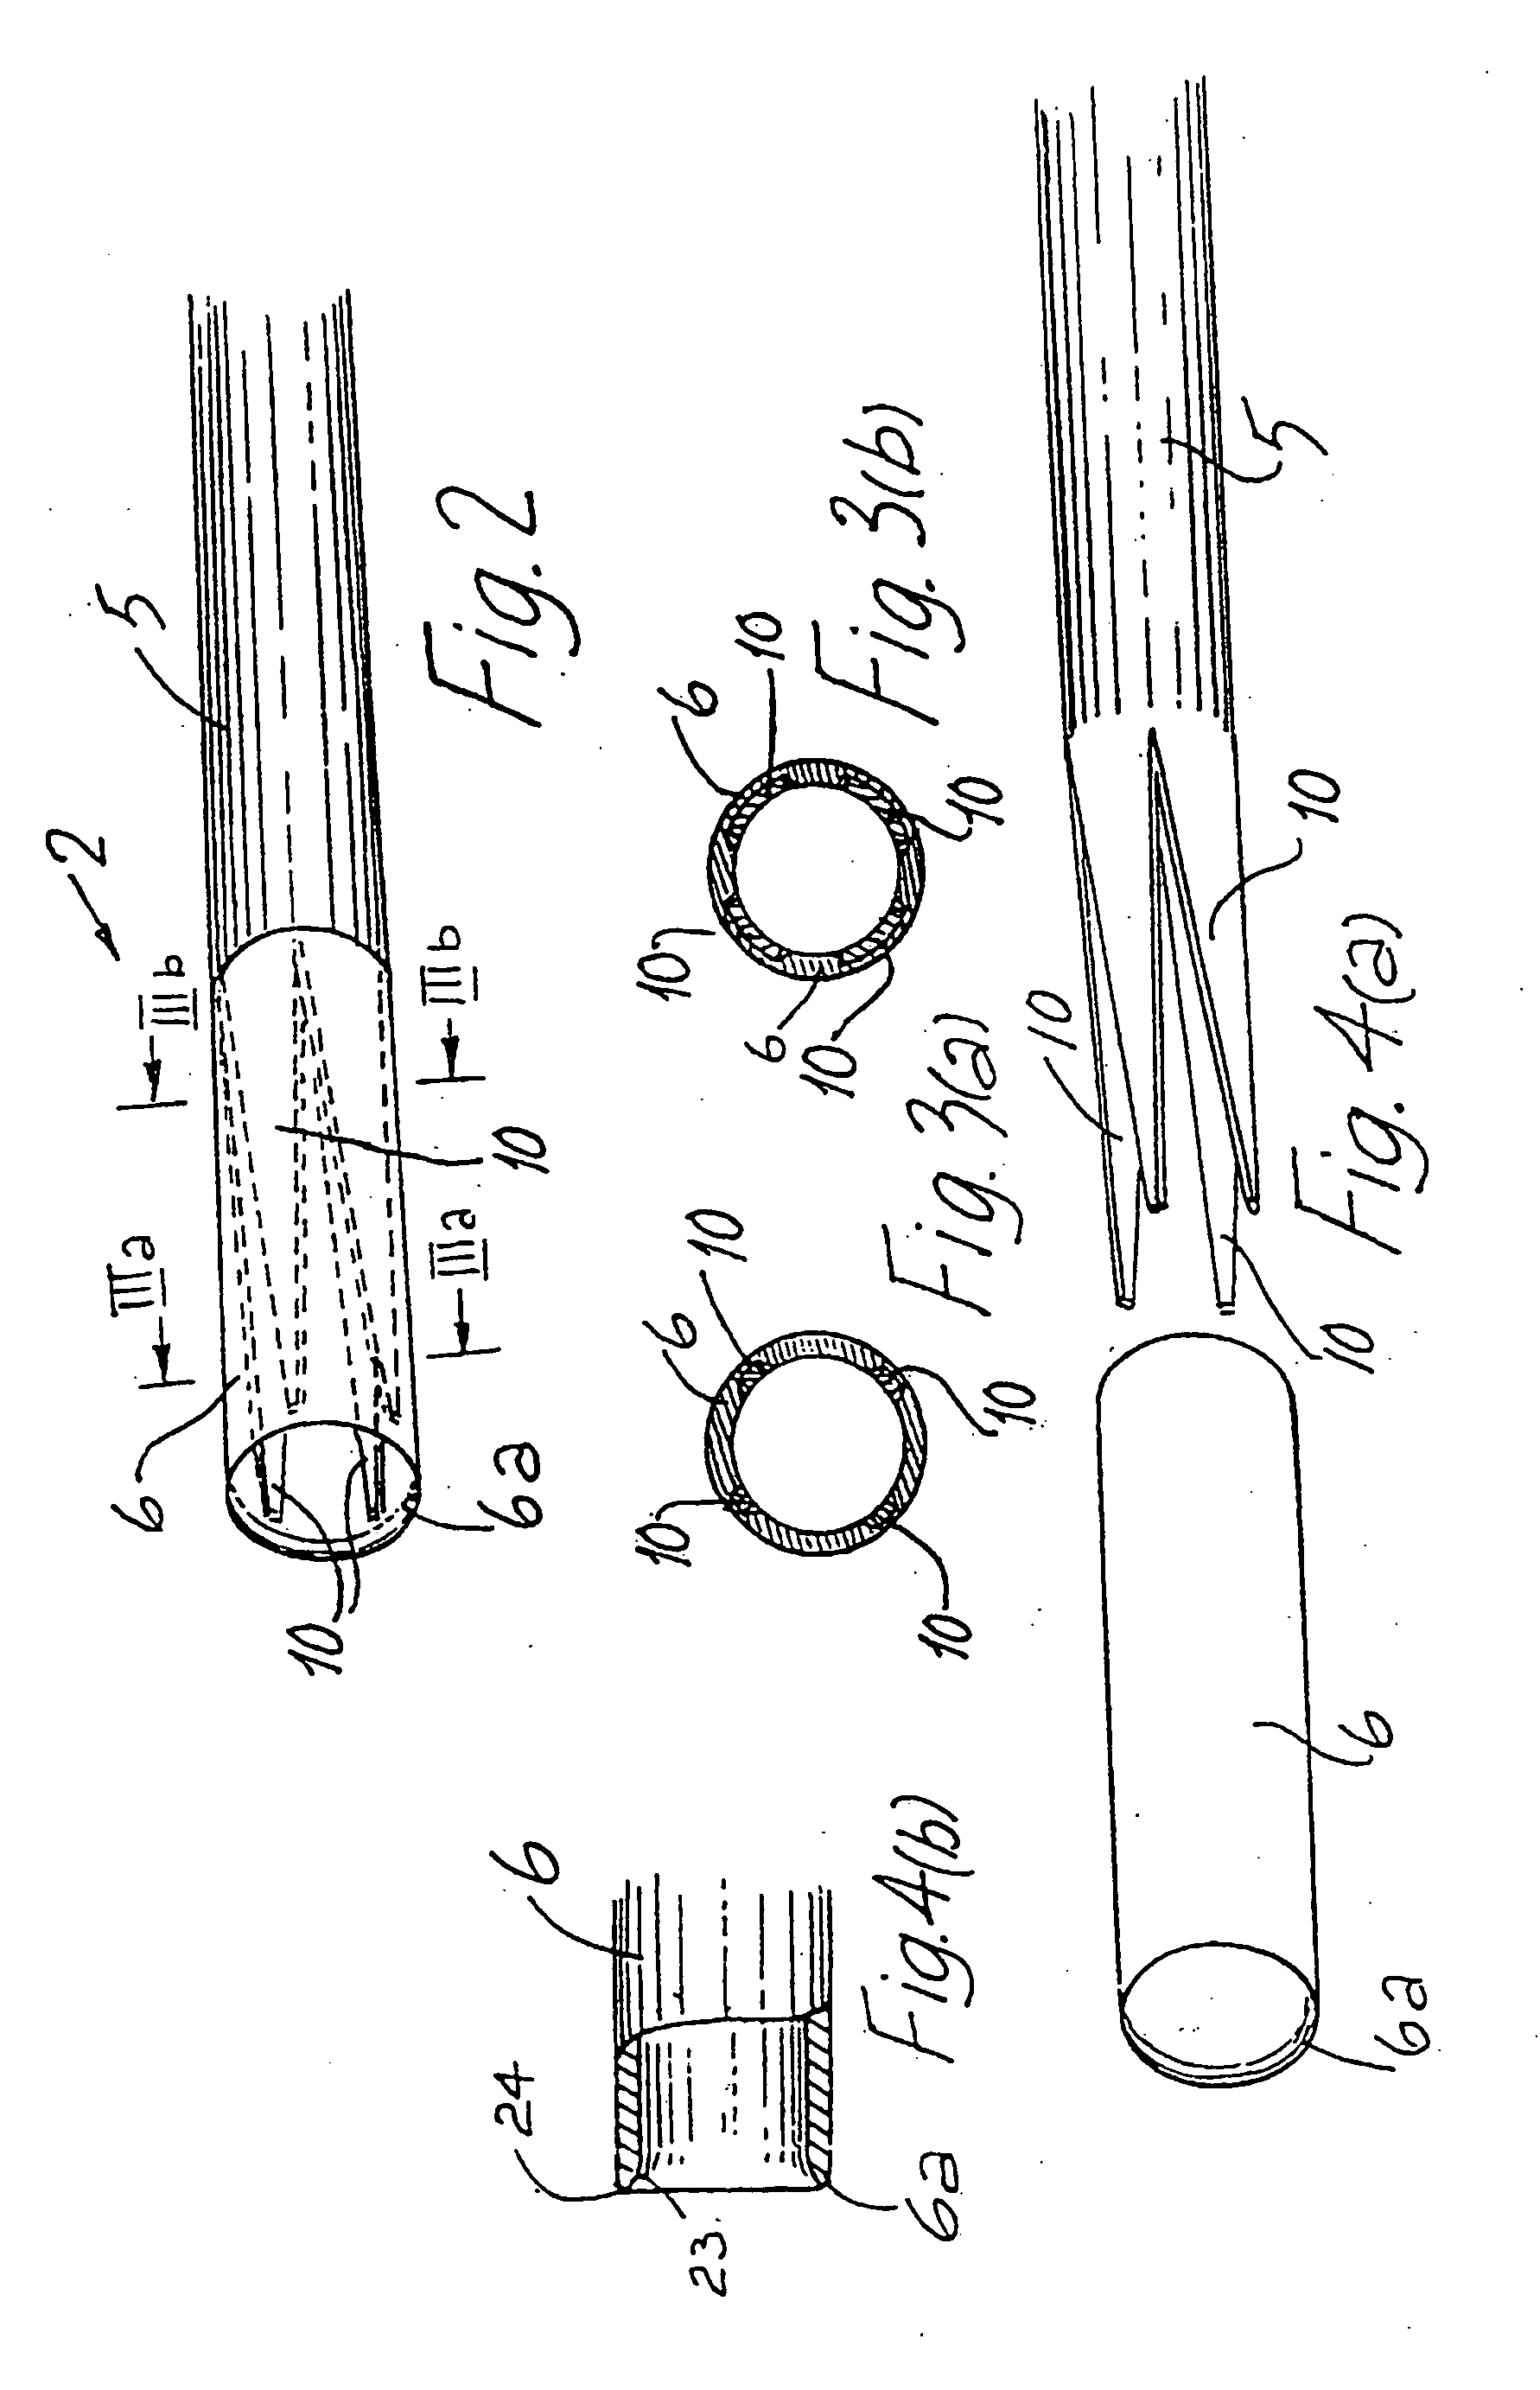 Catheter with an expandable end portion